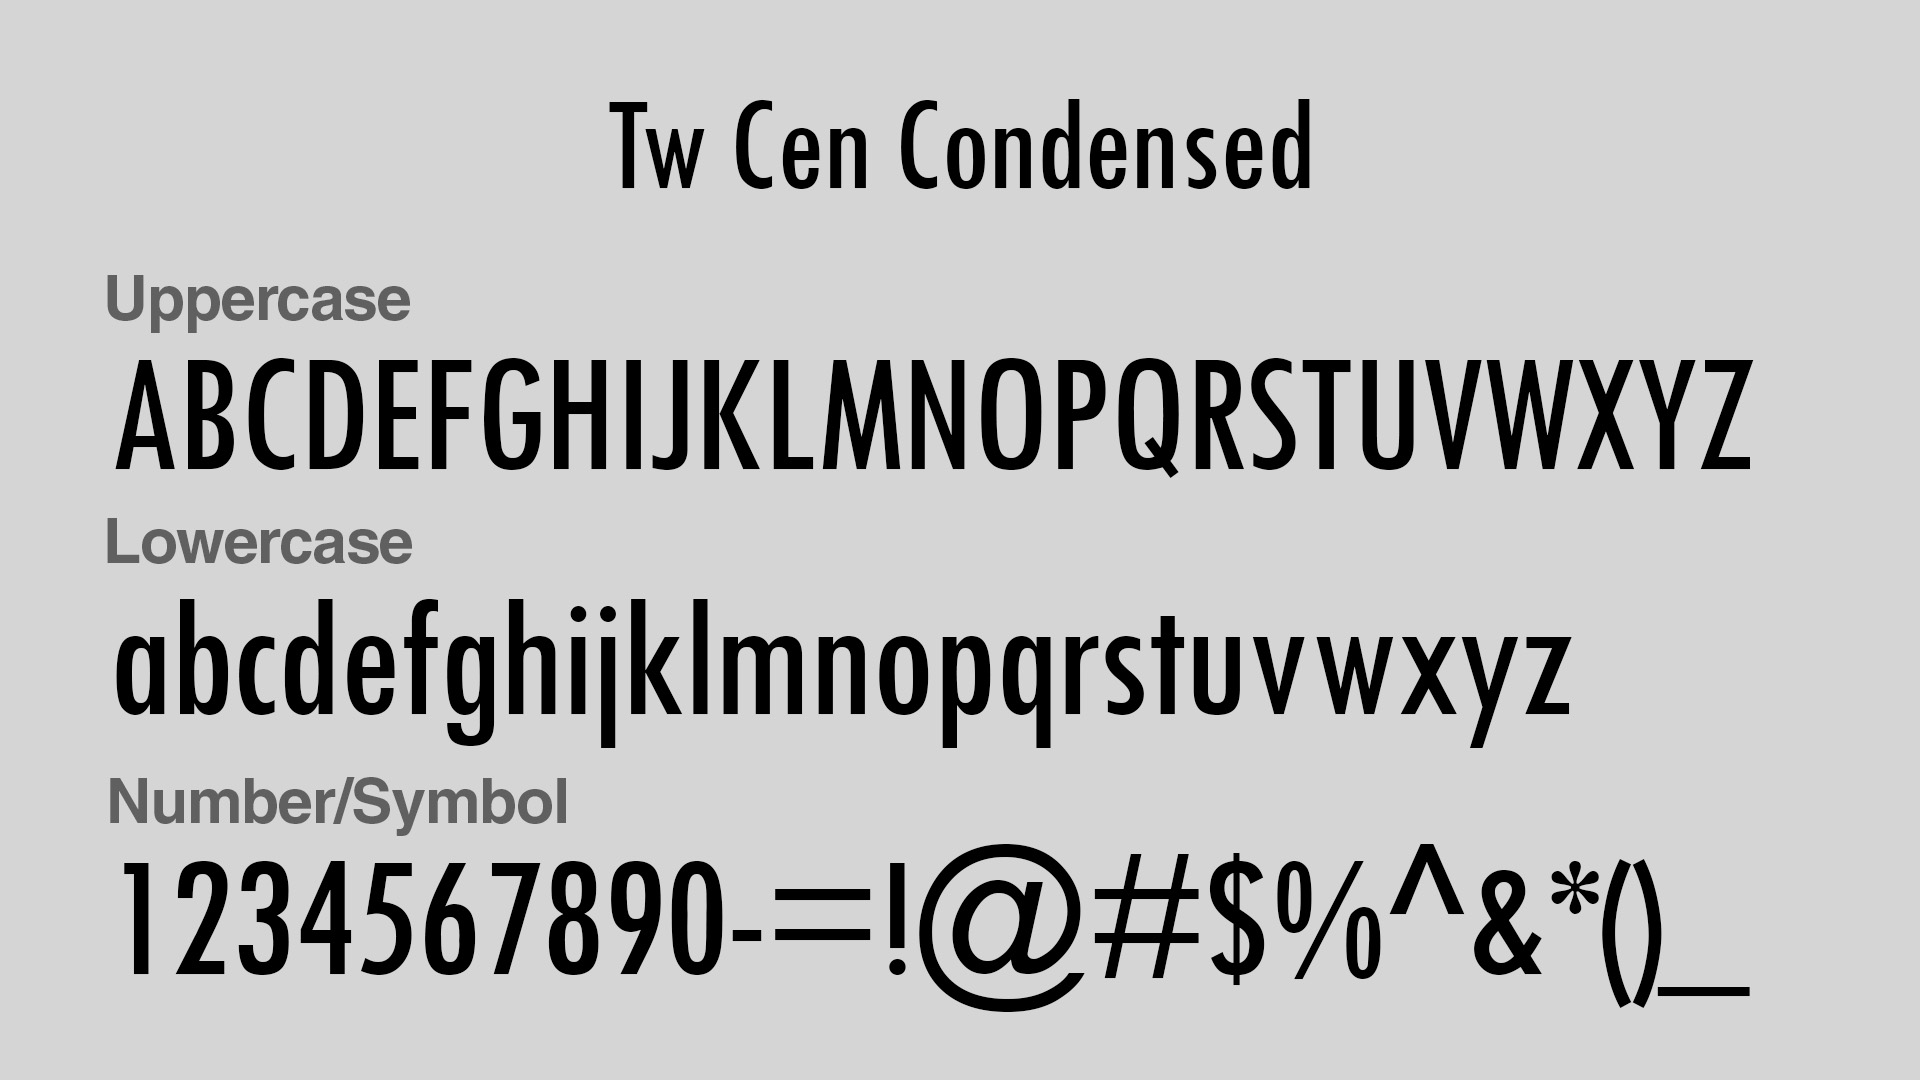 Complete Trajan Pro font family in black on a gray background.